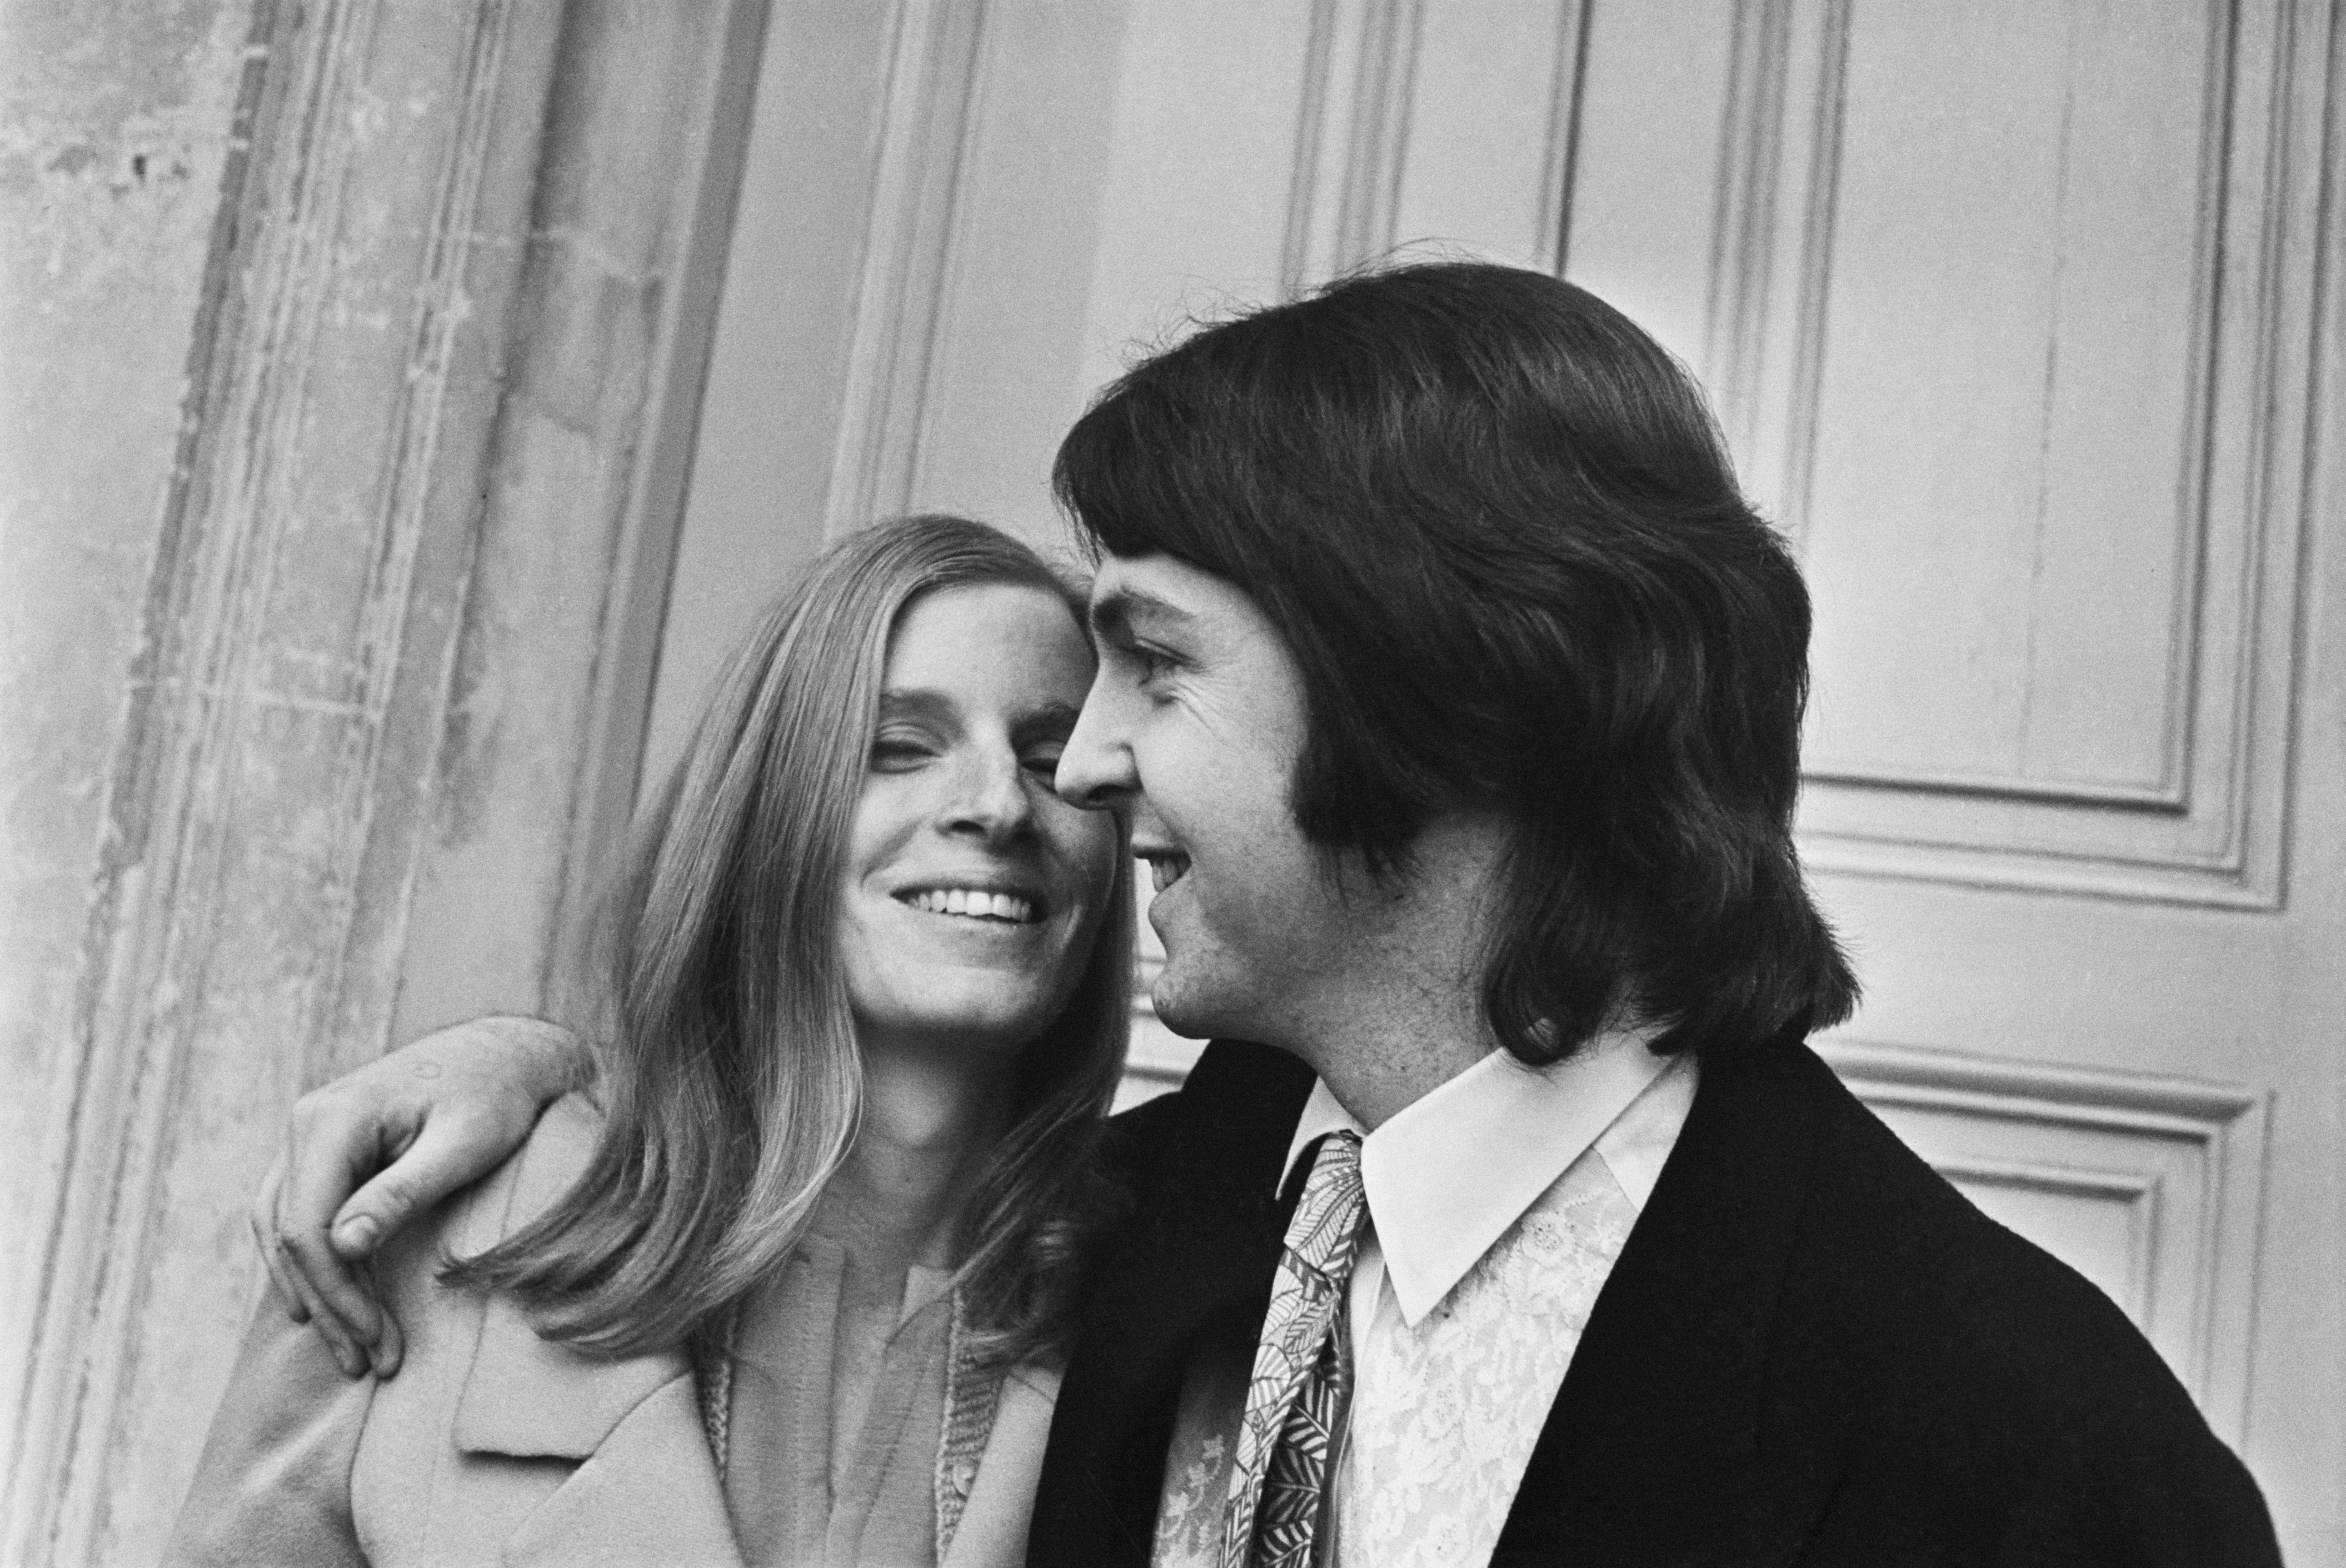 Paul McCartney and Linda McCartney pose after officiating their marriage at Marylebone Registery Office in London on 12th March 1969 | Source: Getty Images